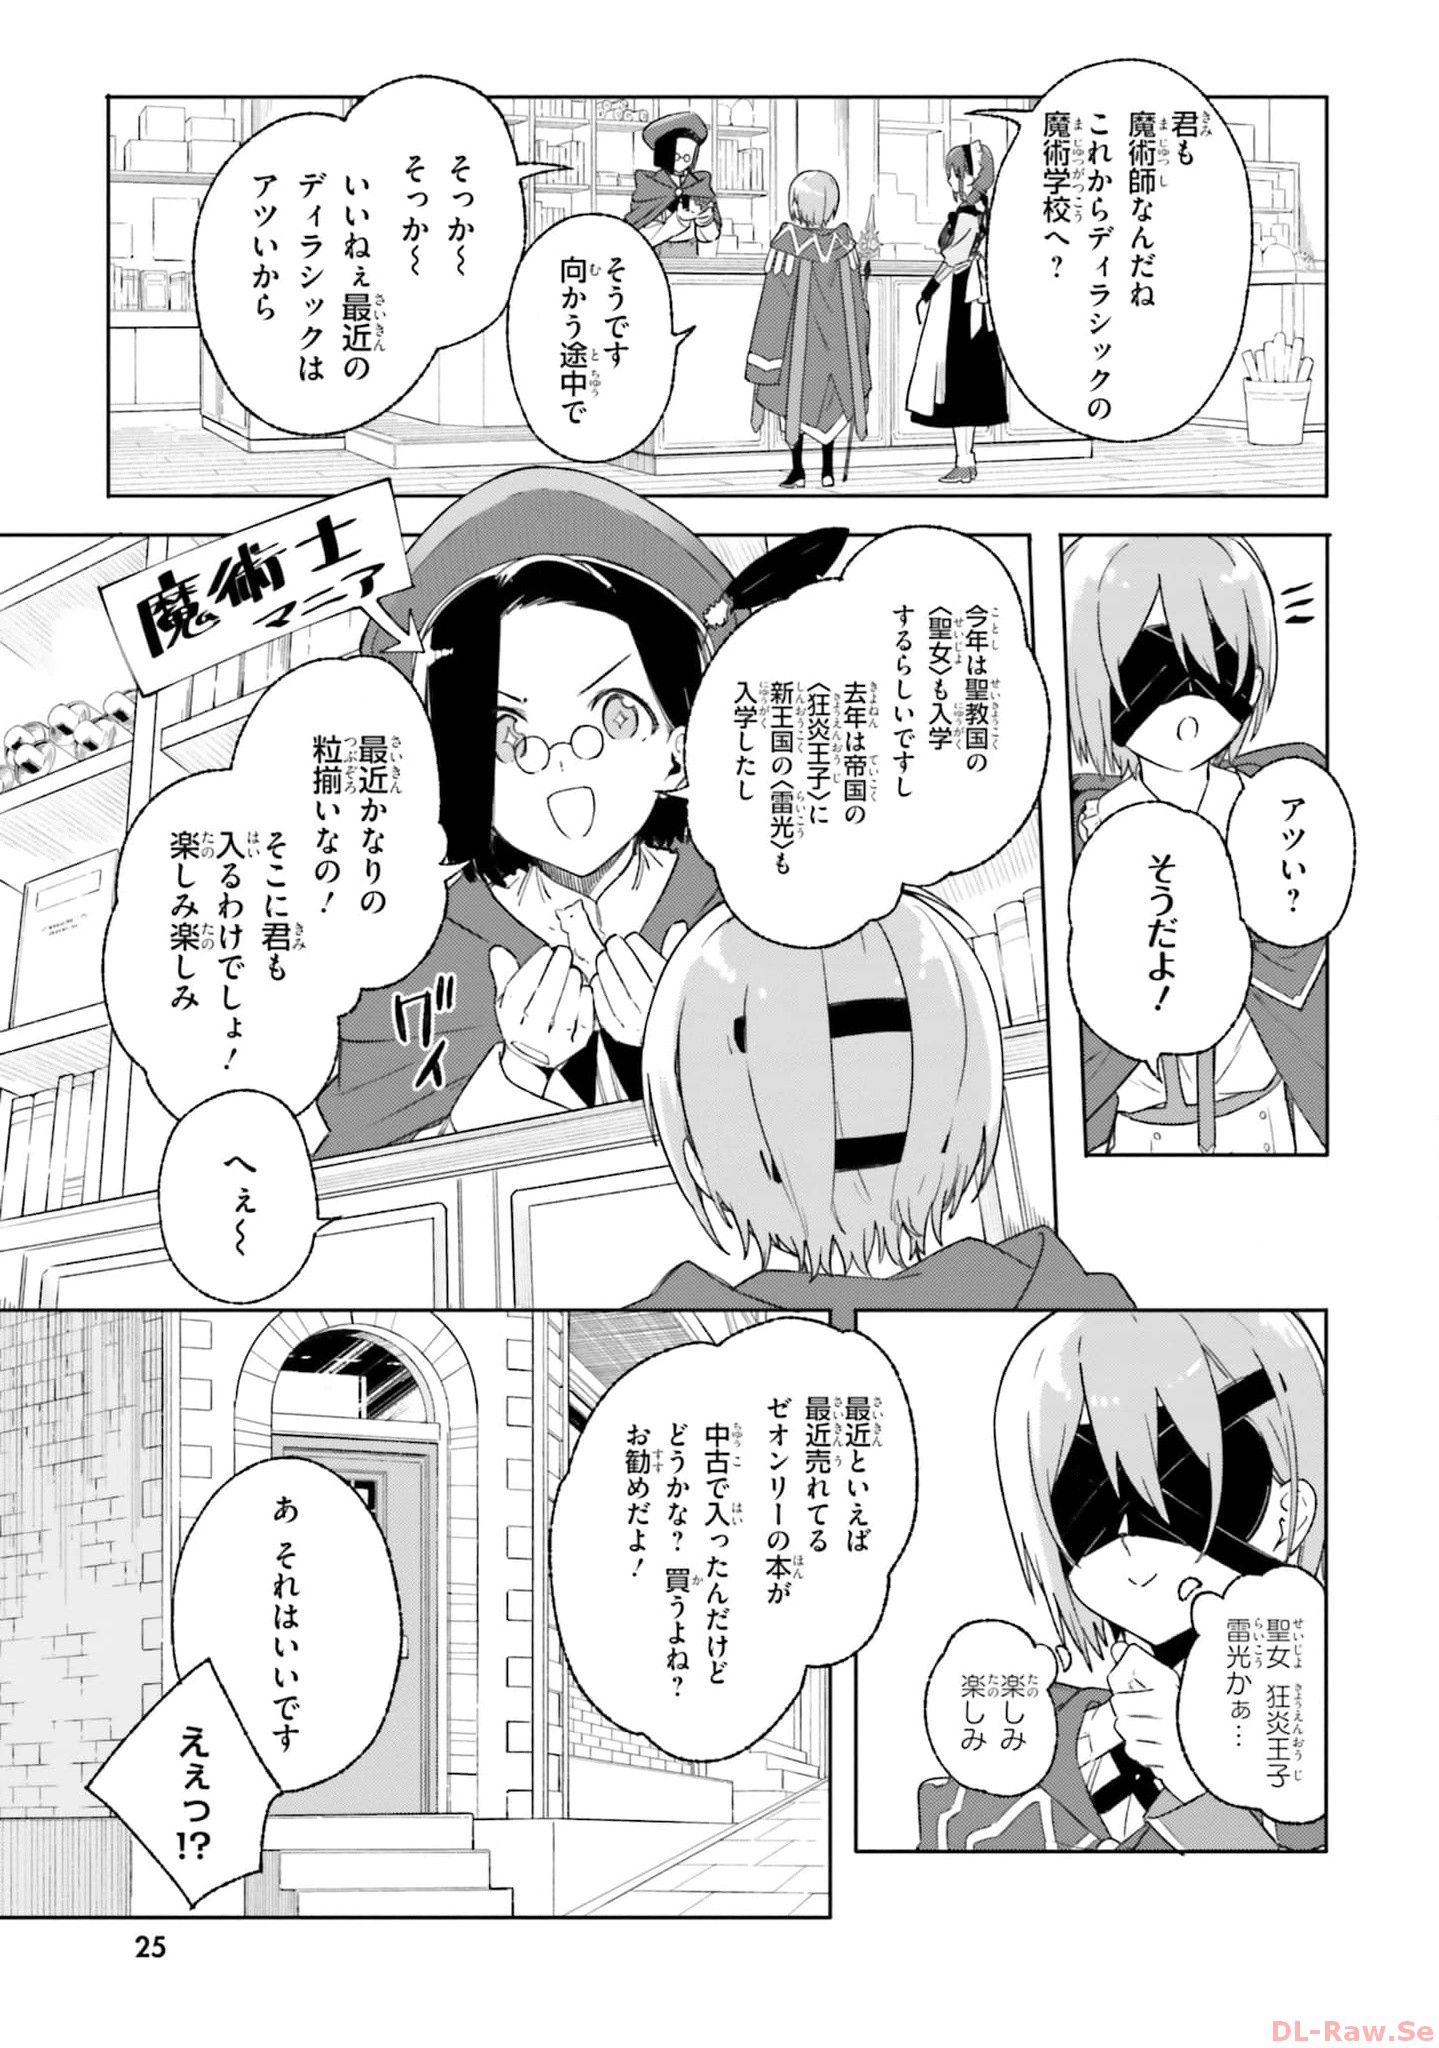 Kunon the Sorcerer Can See Kunon the Sorcerer Can See Through 魔術師クノンは見えている 第14話 - Page 26